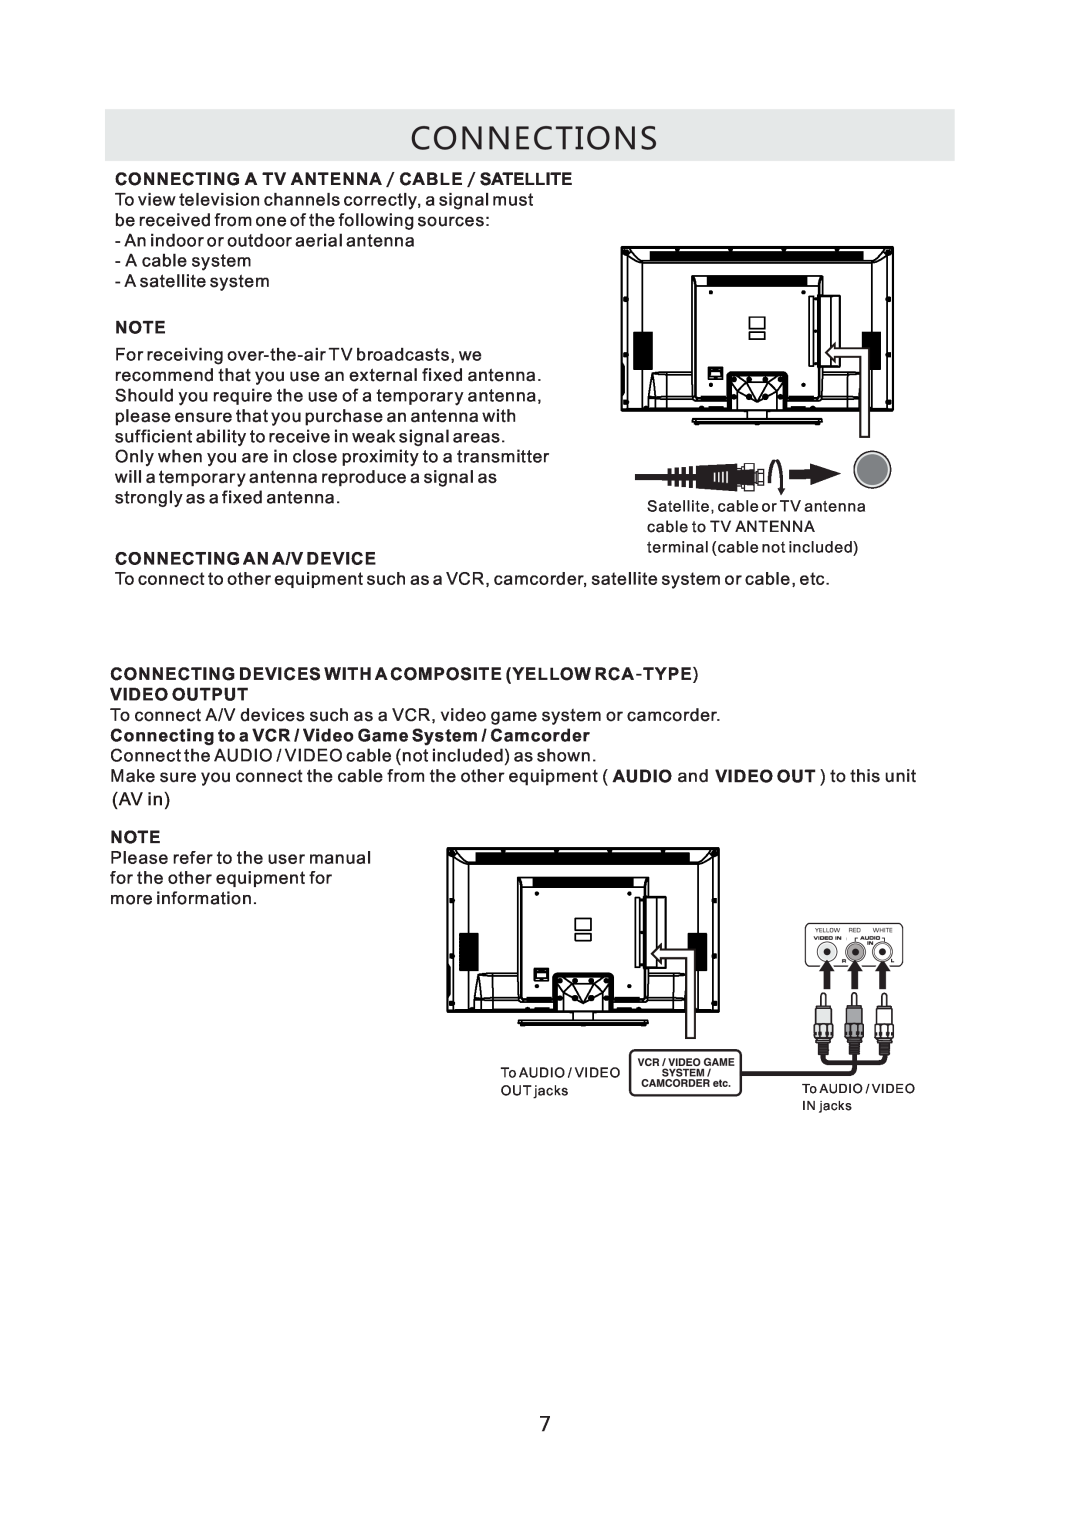 Westinghouse CW50T9XW user manual Connections, Connecting An A/V Device 